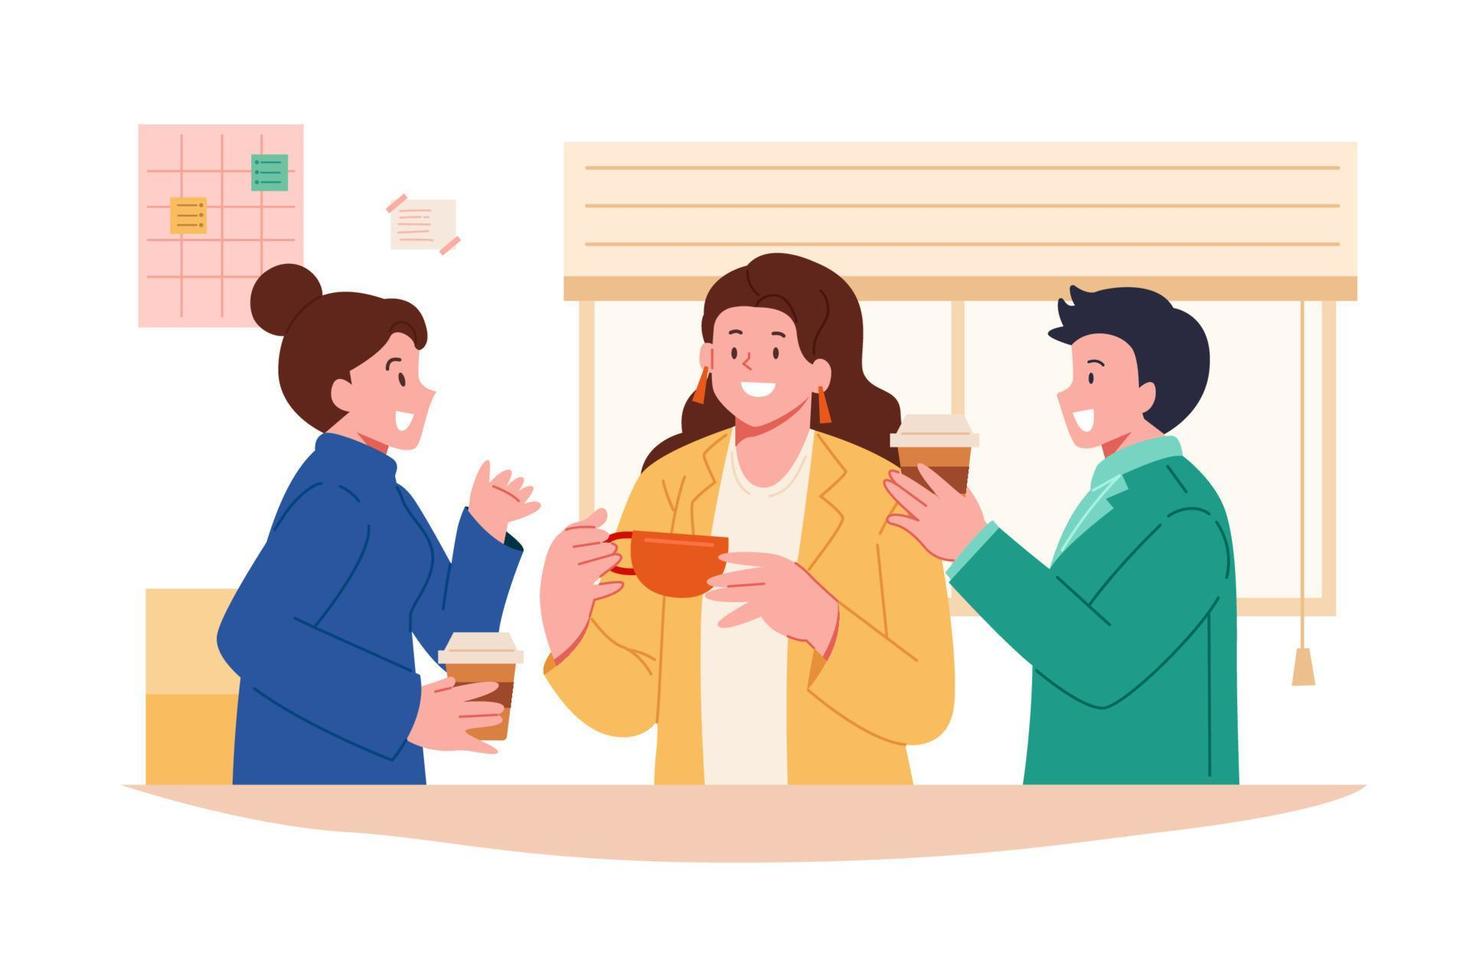 Team of workers having coffee and talking during break in office. Flat vector illustration.